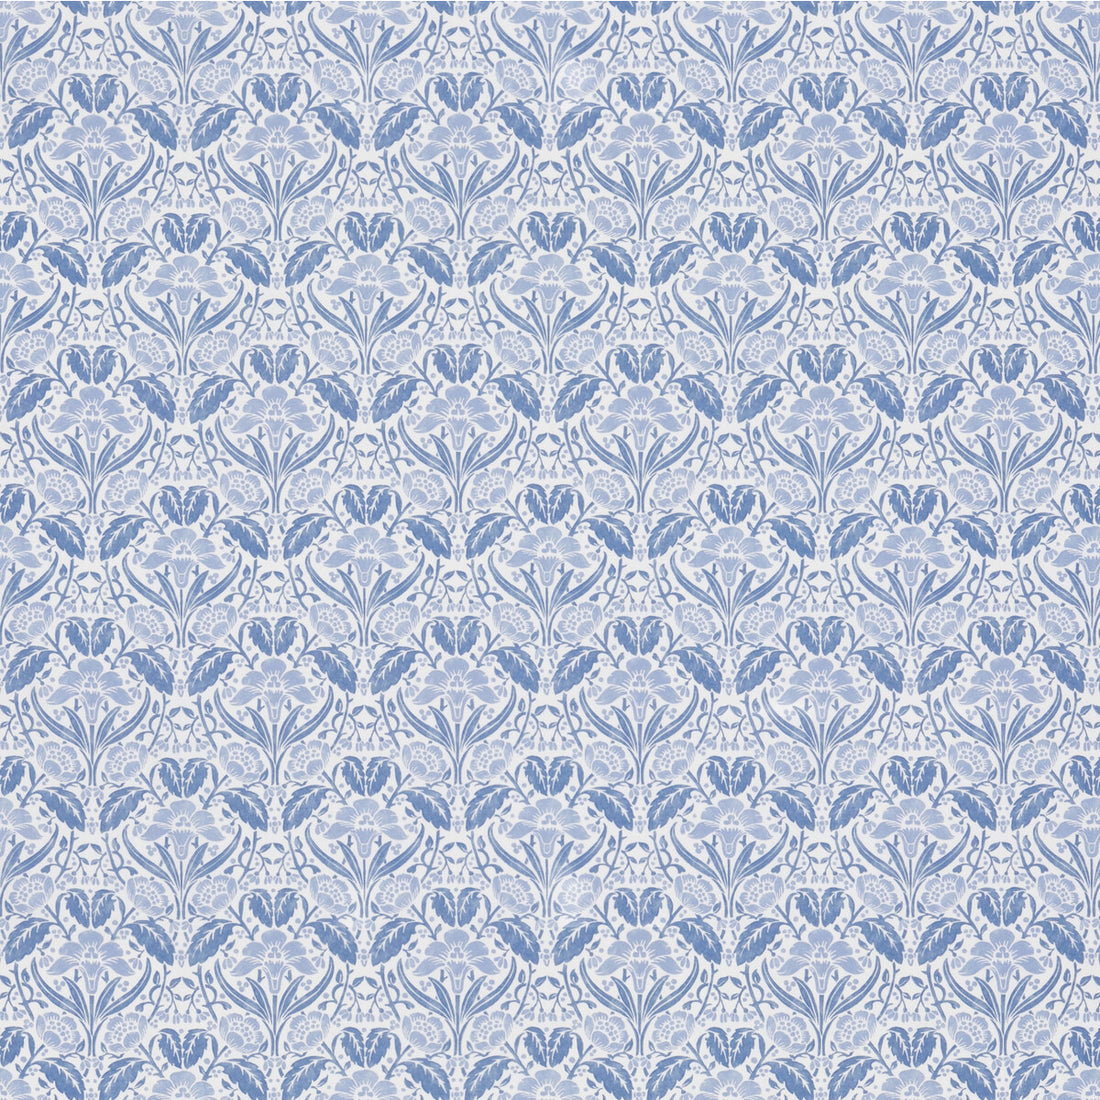 Iris Meadow Cotton fabric in blue color - pattern BP10968.2.0 - by G P &amp; J Baker in the Original Brantwood Fabric collection